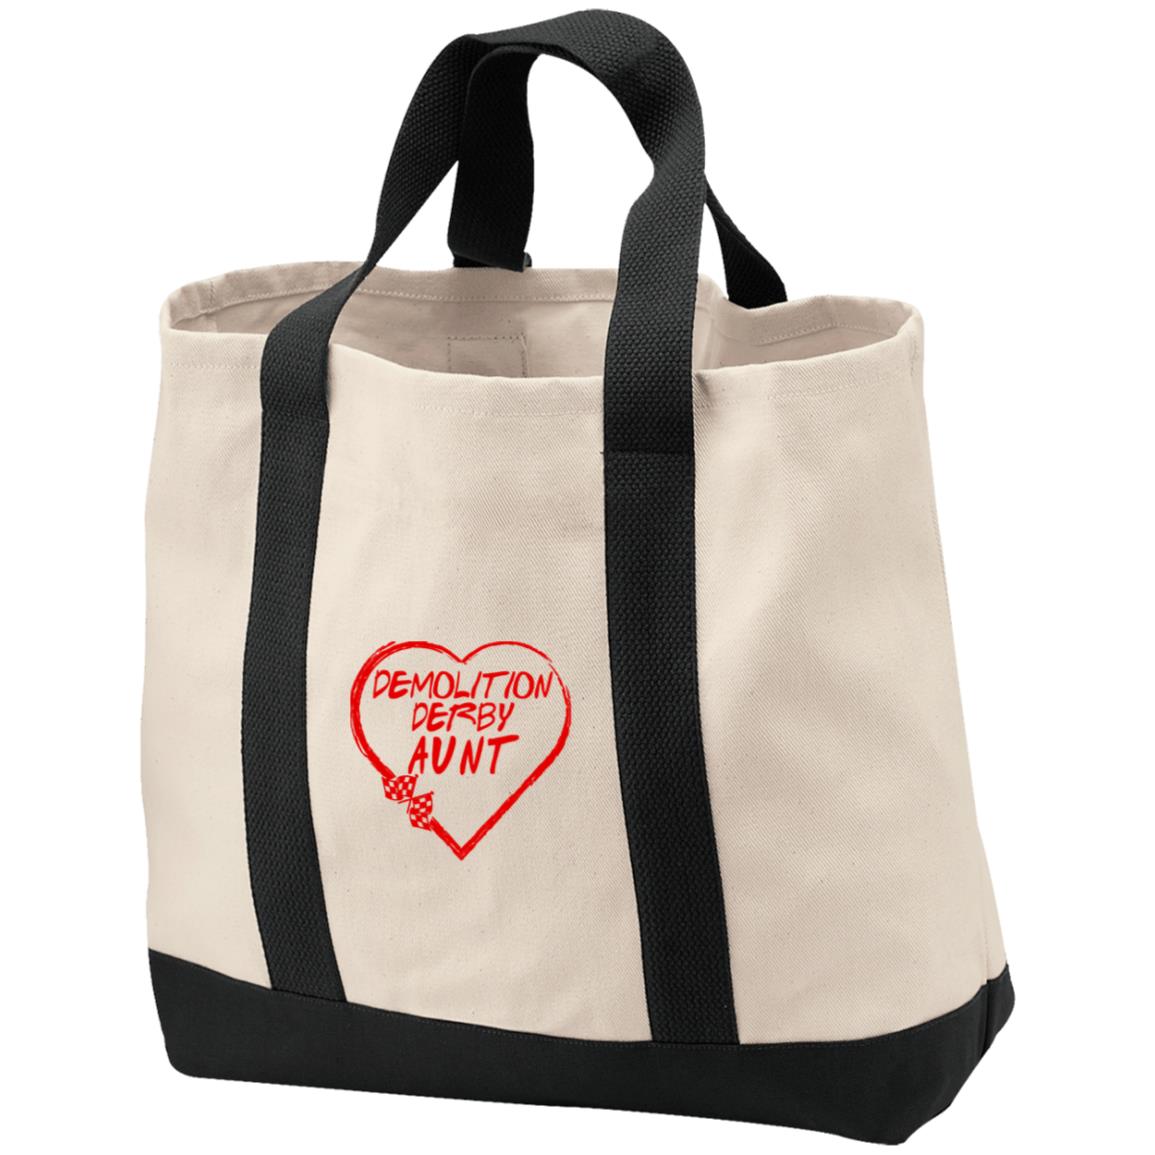 Demolition Derby Aunt Heart 2-Tone Shopping Tote